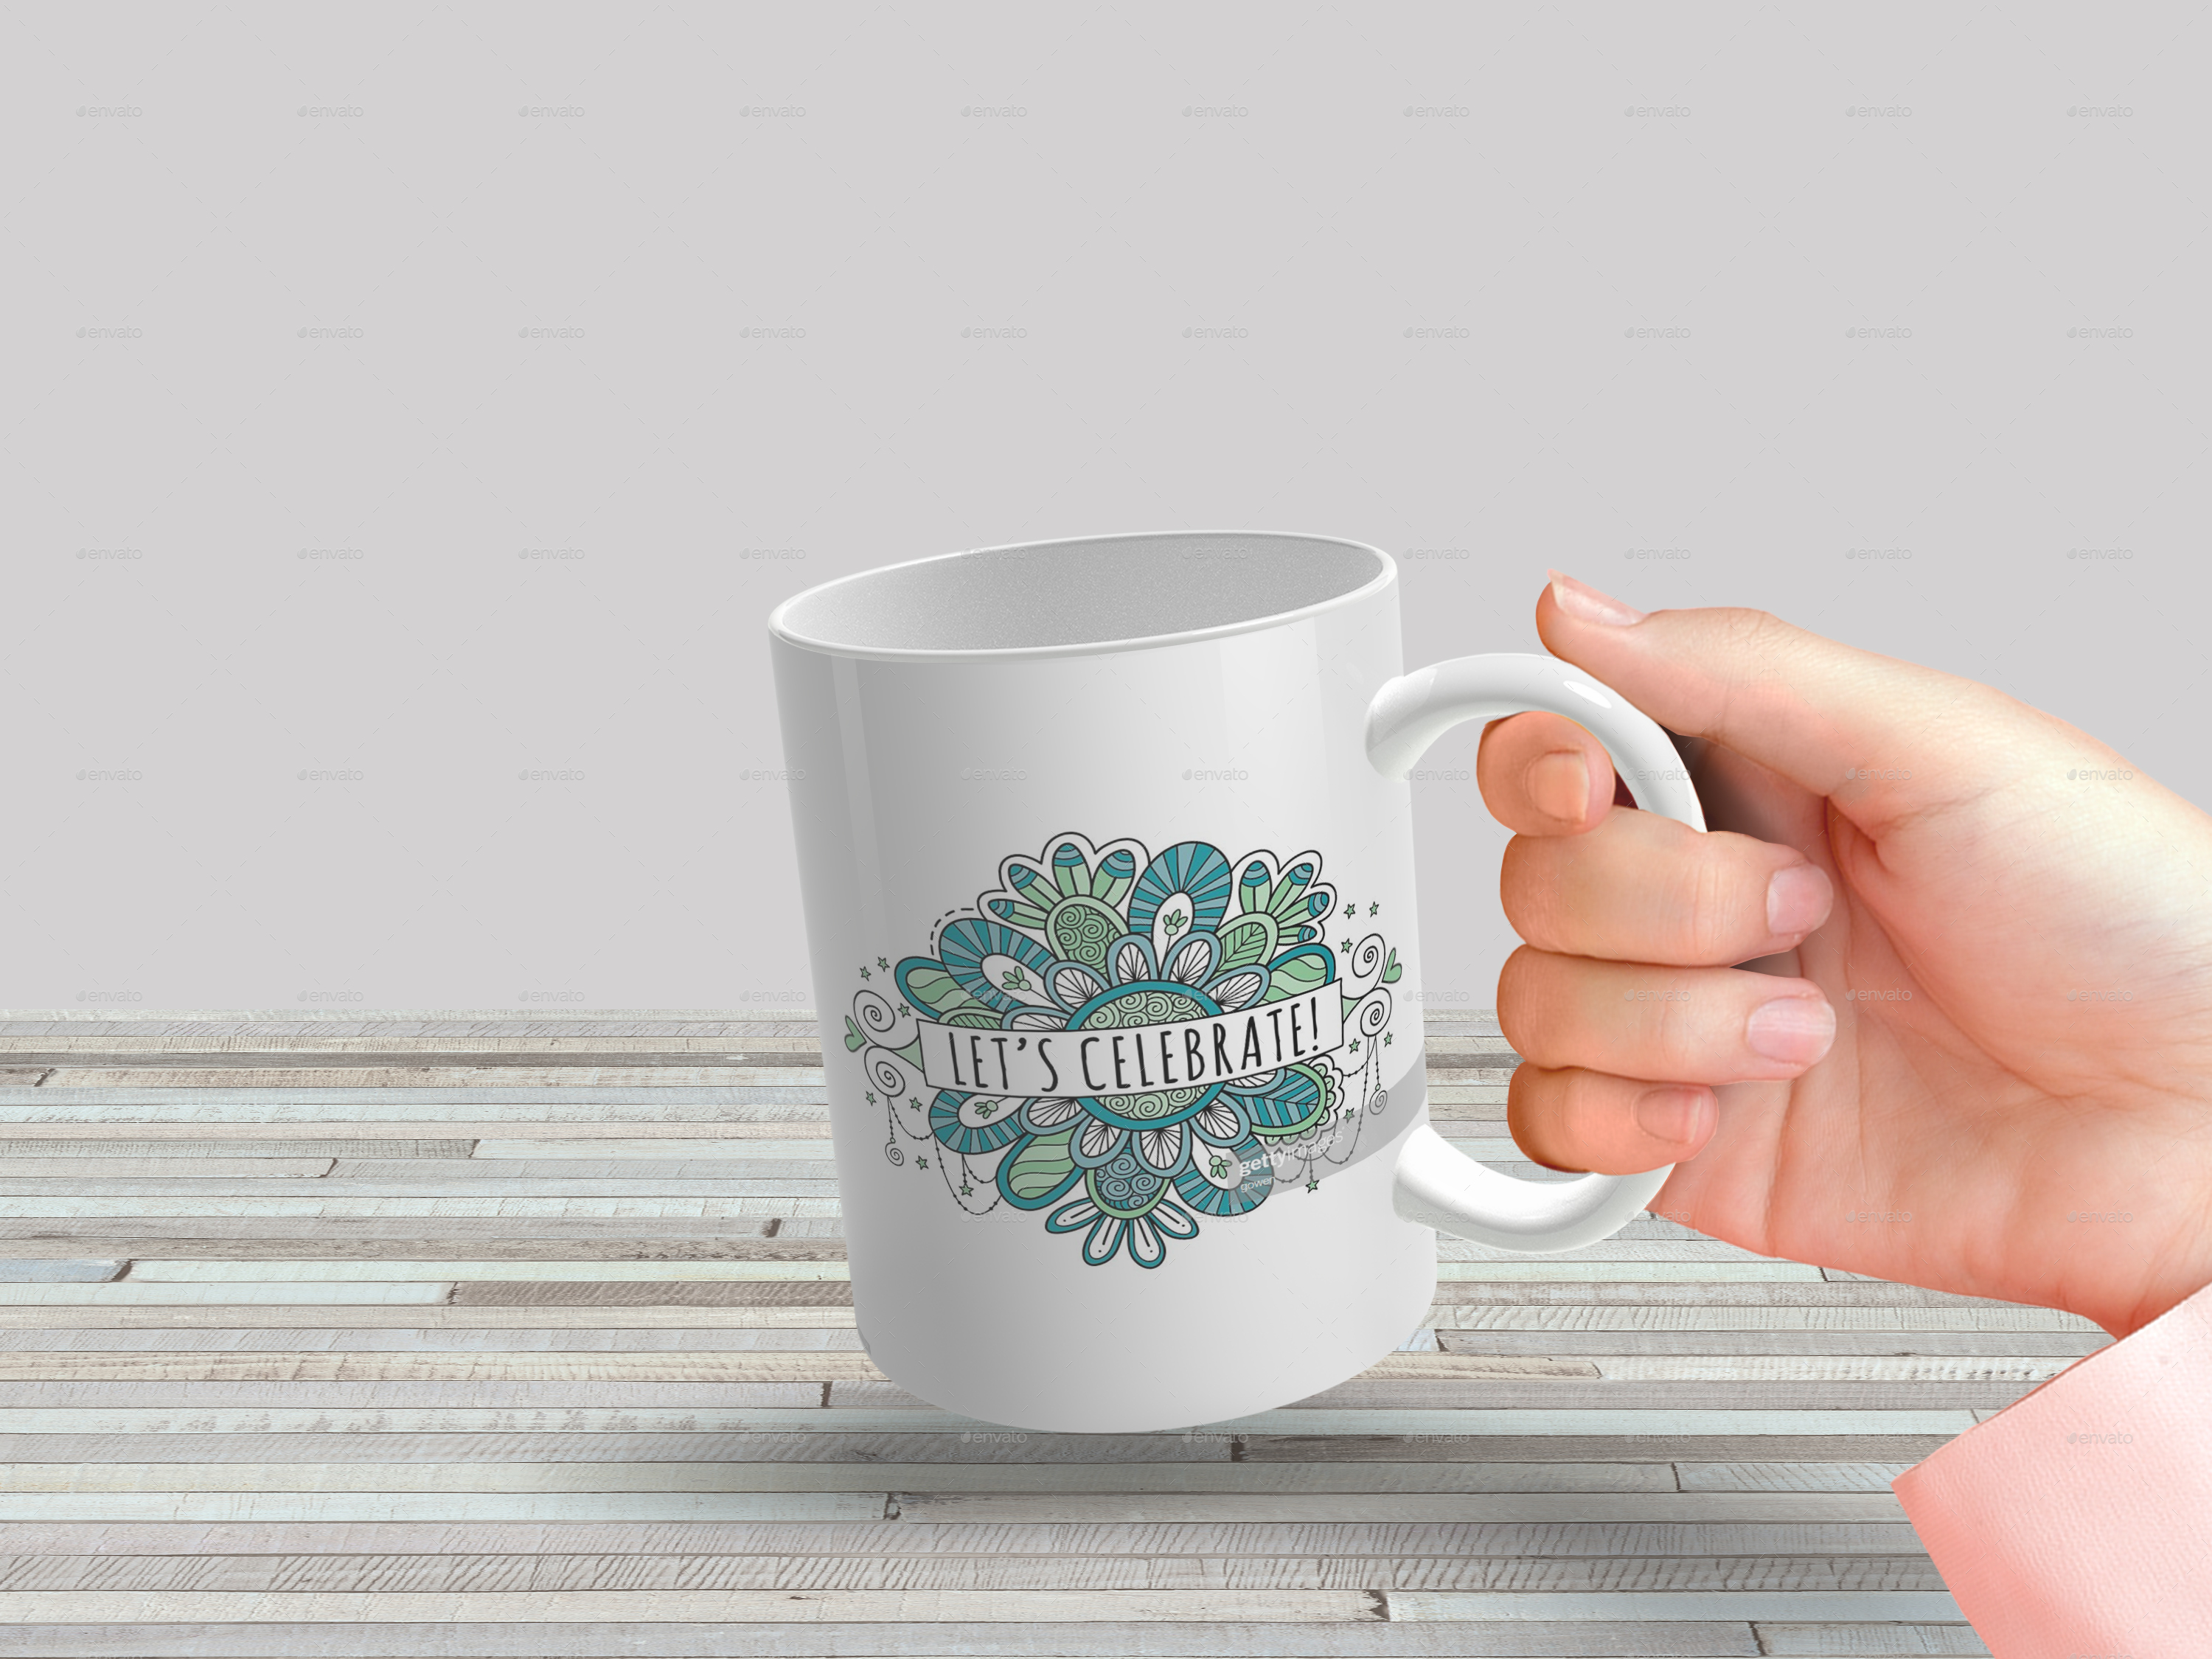 Download Full Wrap Mug Mockup by GraphicMonday | GraphicRiver